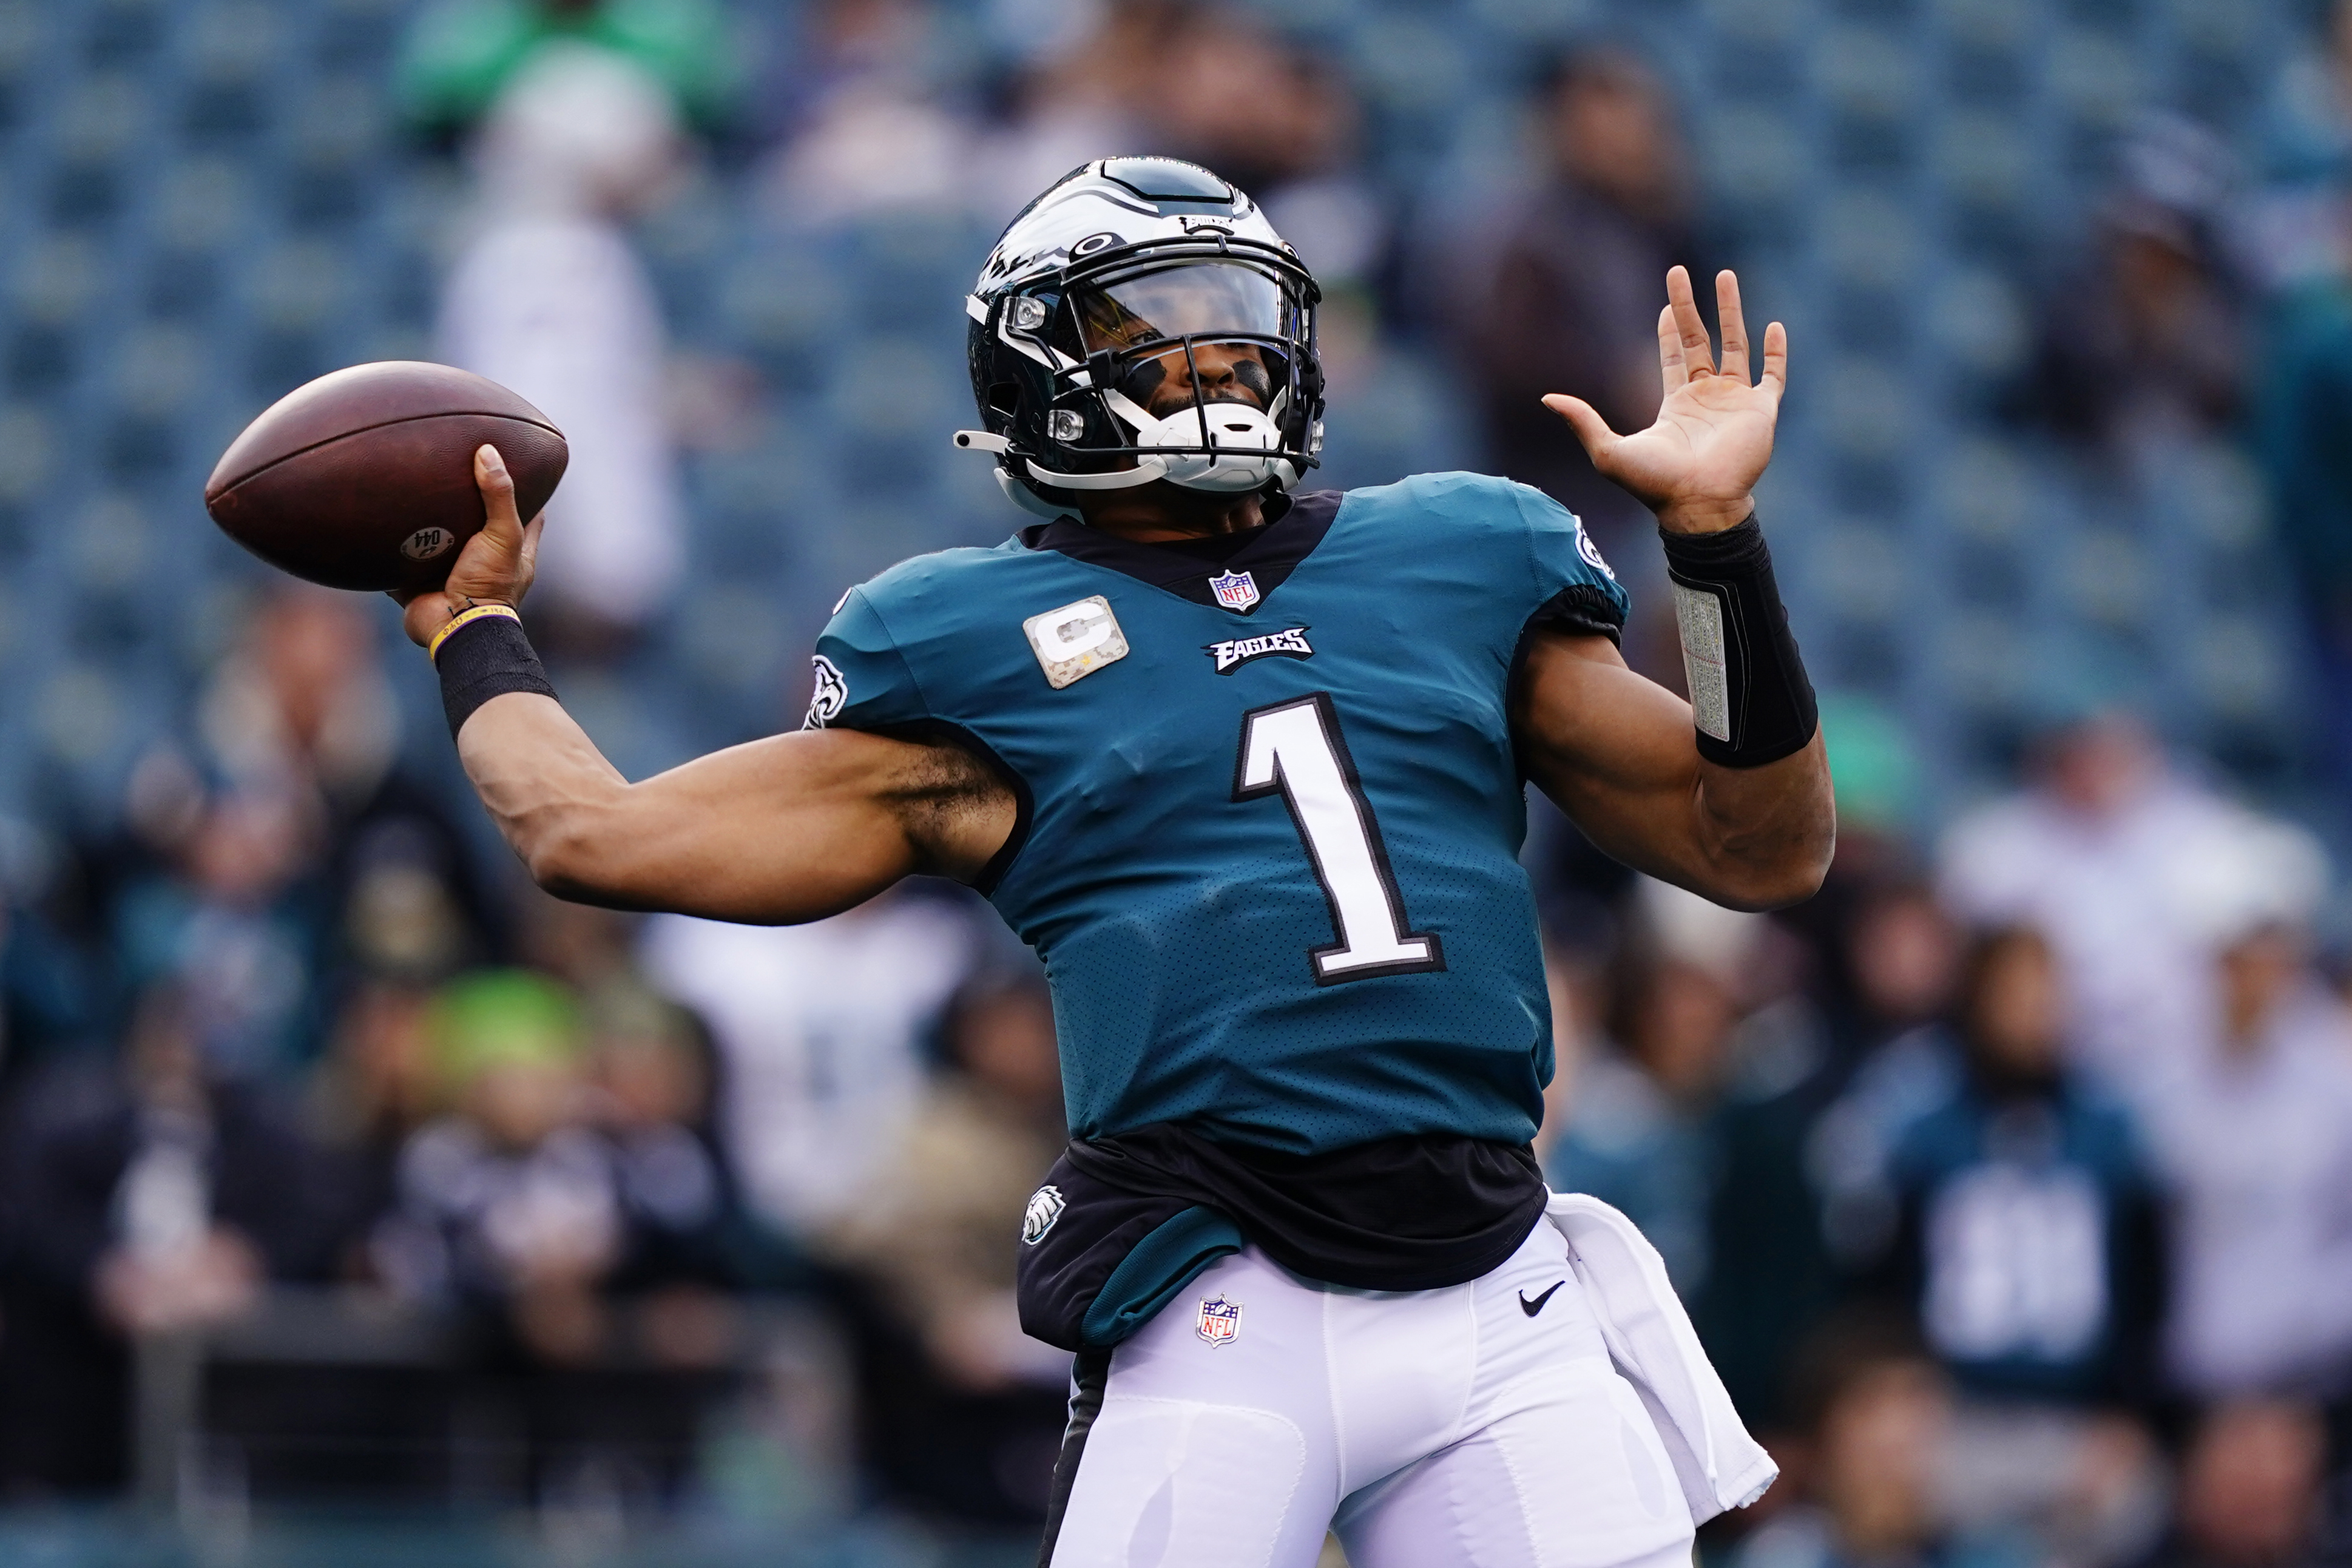 Jalen Hurts' second quarterback sneak for a TD gives the Eagles a